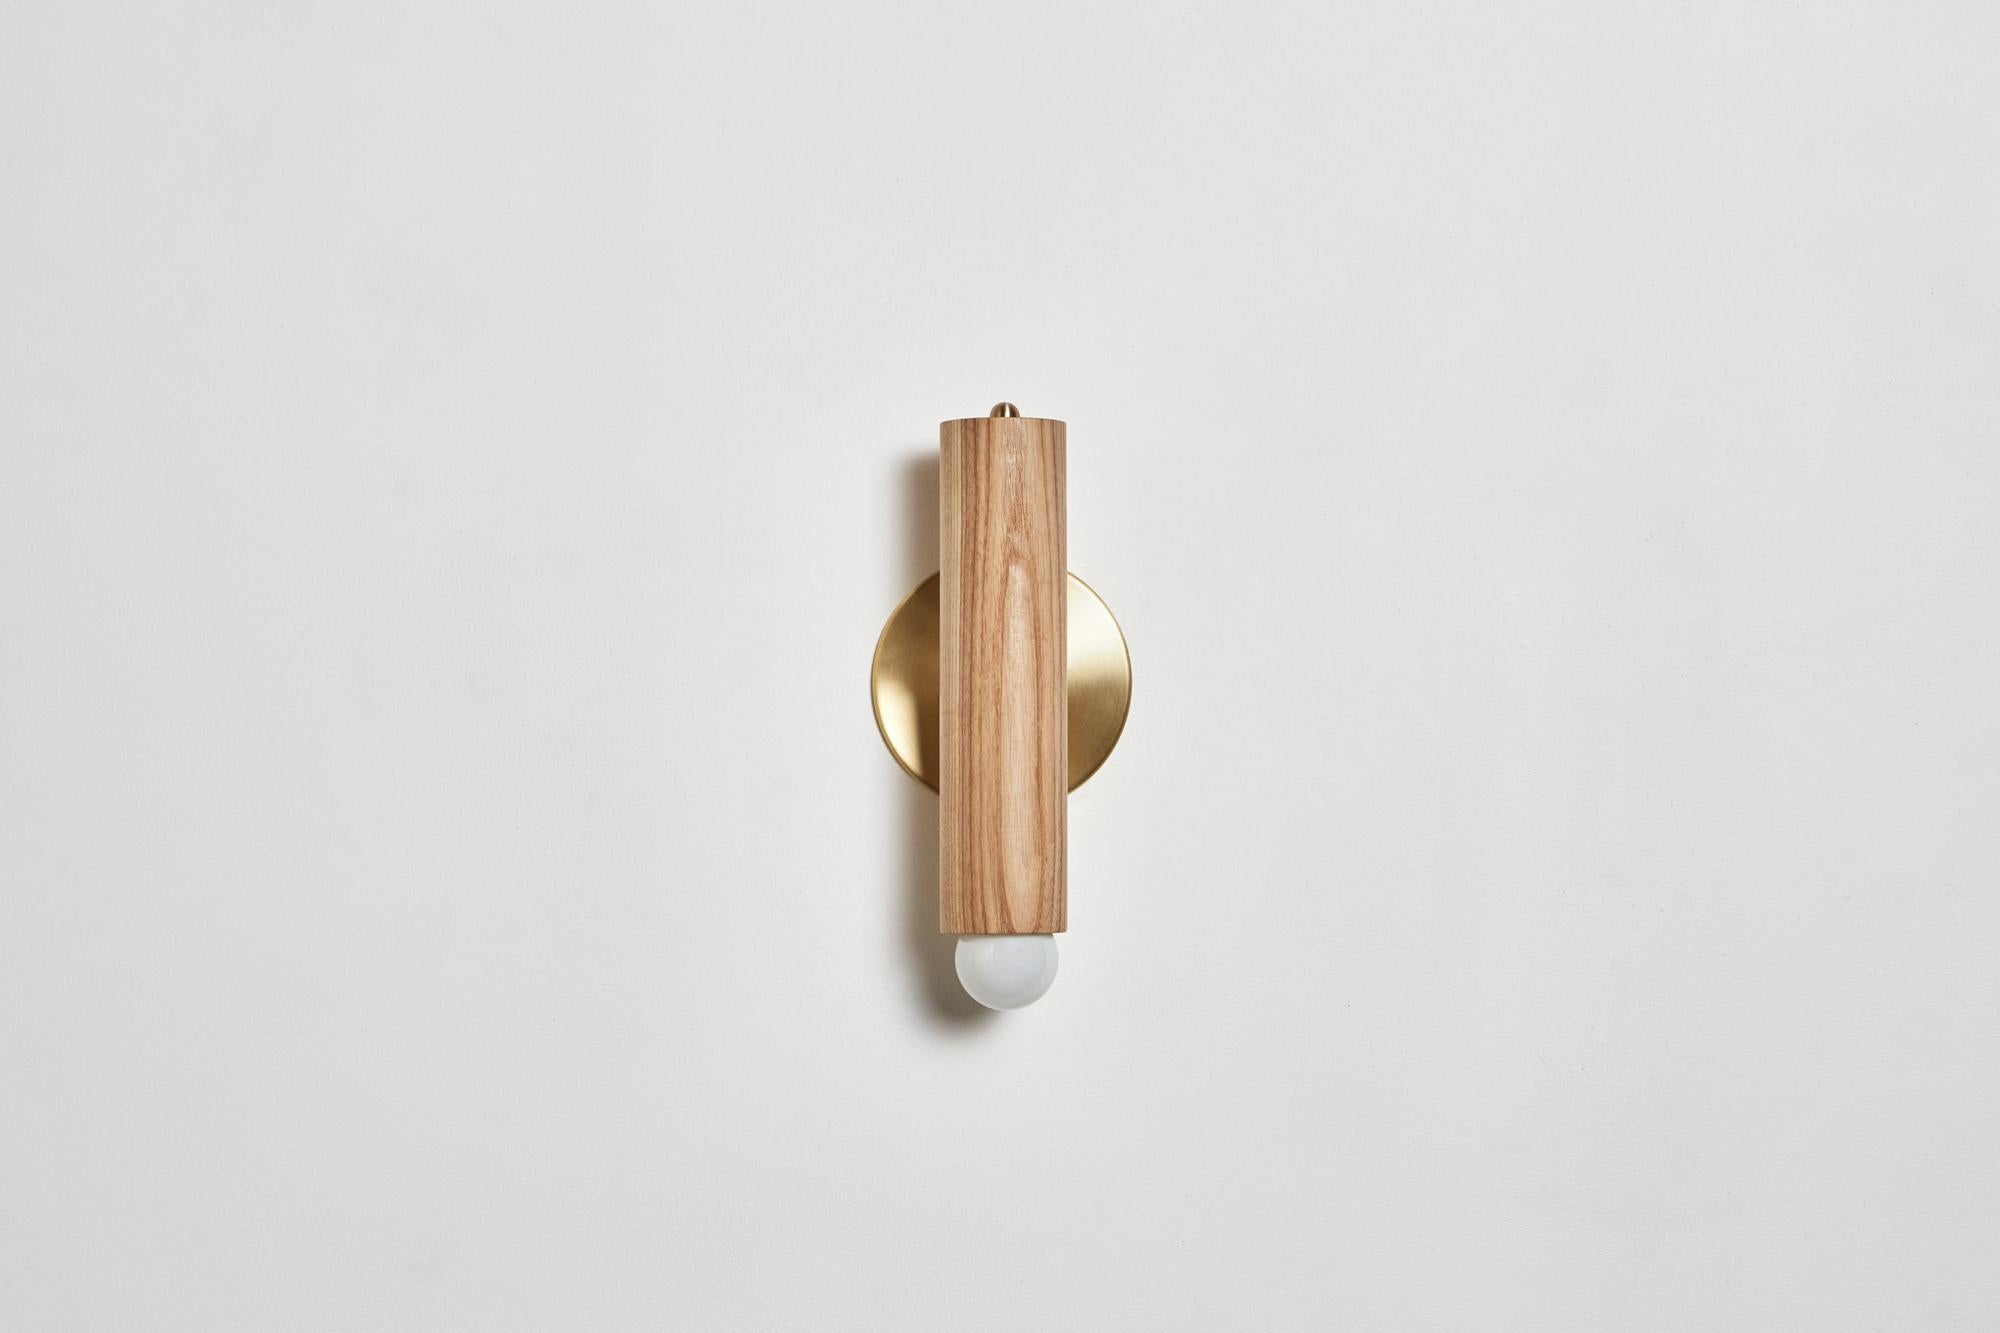 The lodge sconce is composed of a singular wooden column mounted on a metal back plate. The fixture swivels from side to side, directing light from a softly glowing bulb.

Shown in natural oak and hewn brass. Dimmer located at top of sconce.